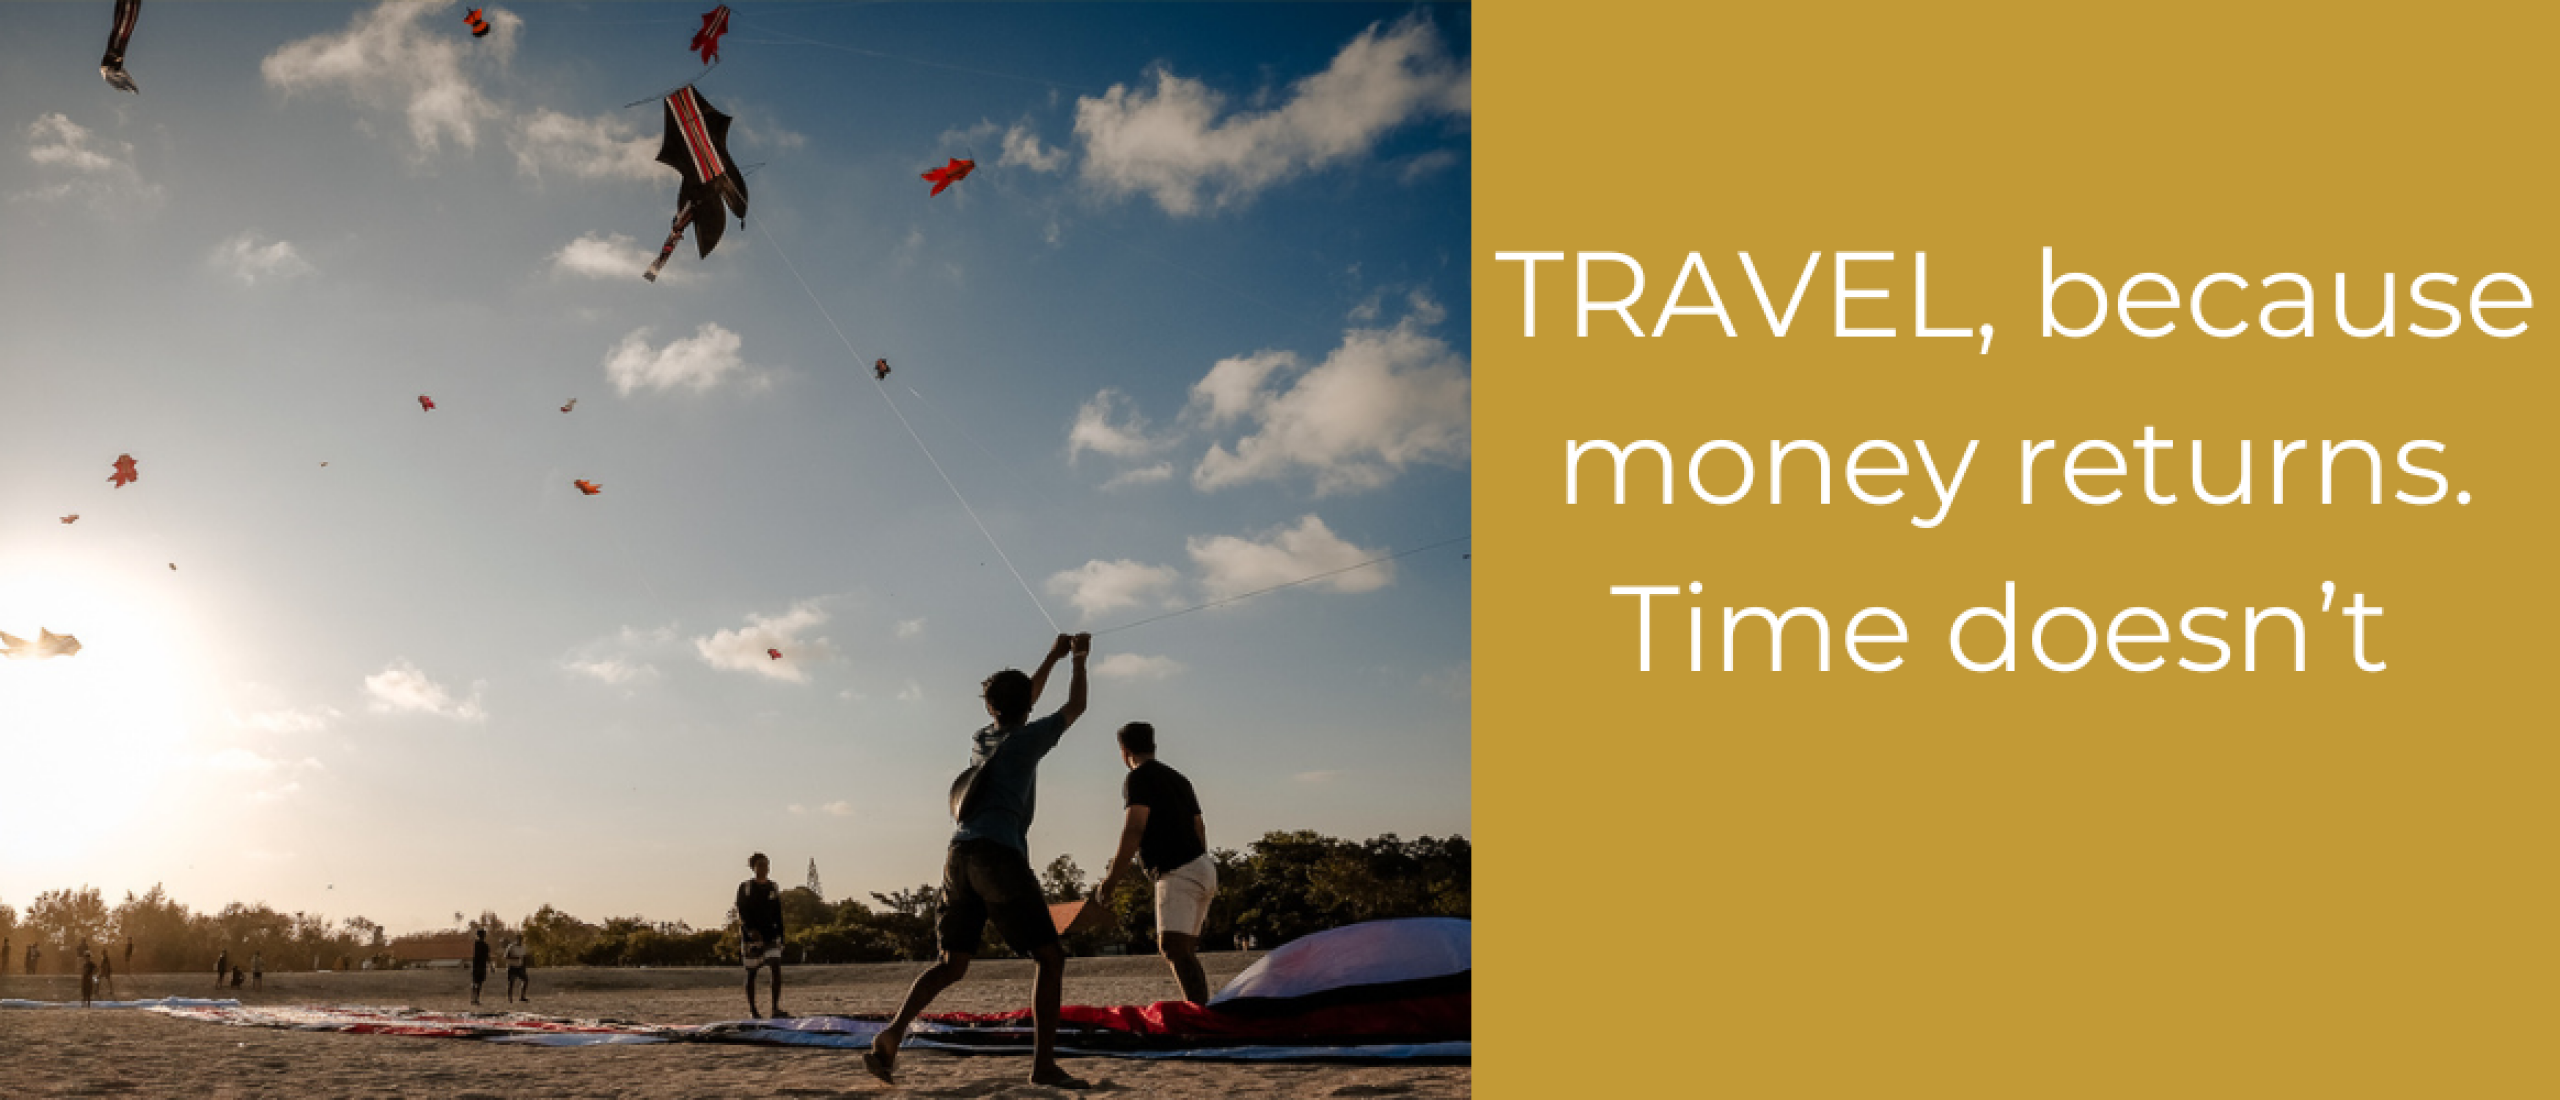 TRAVEL, because money returns. Time doesn’t